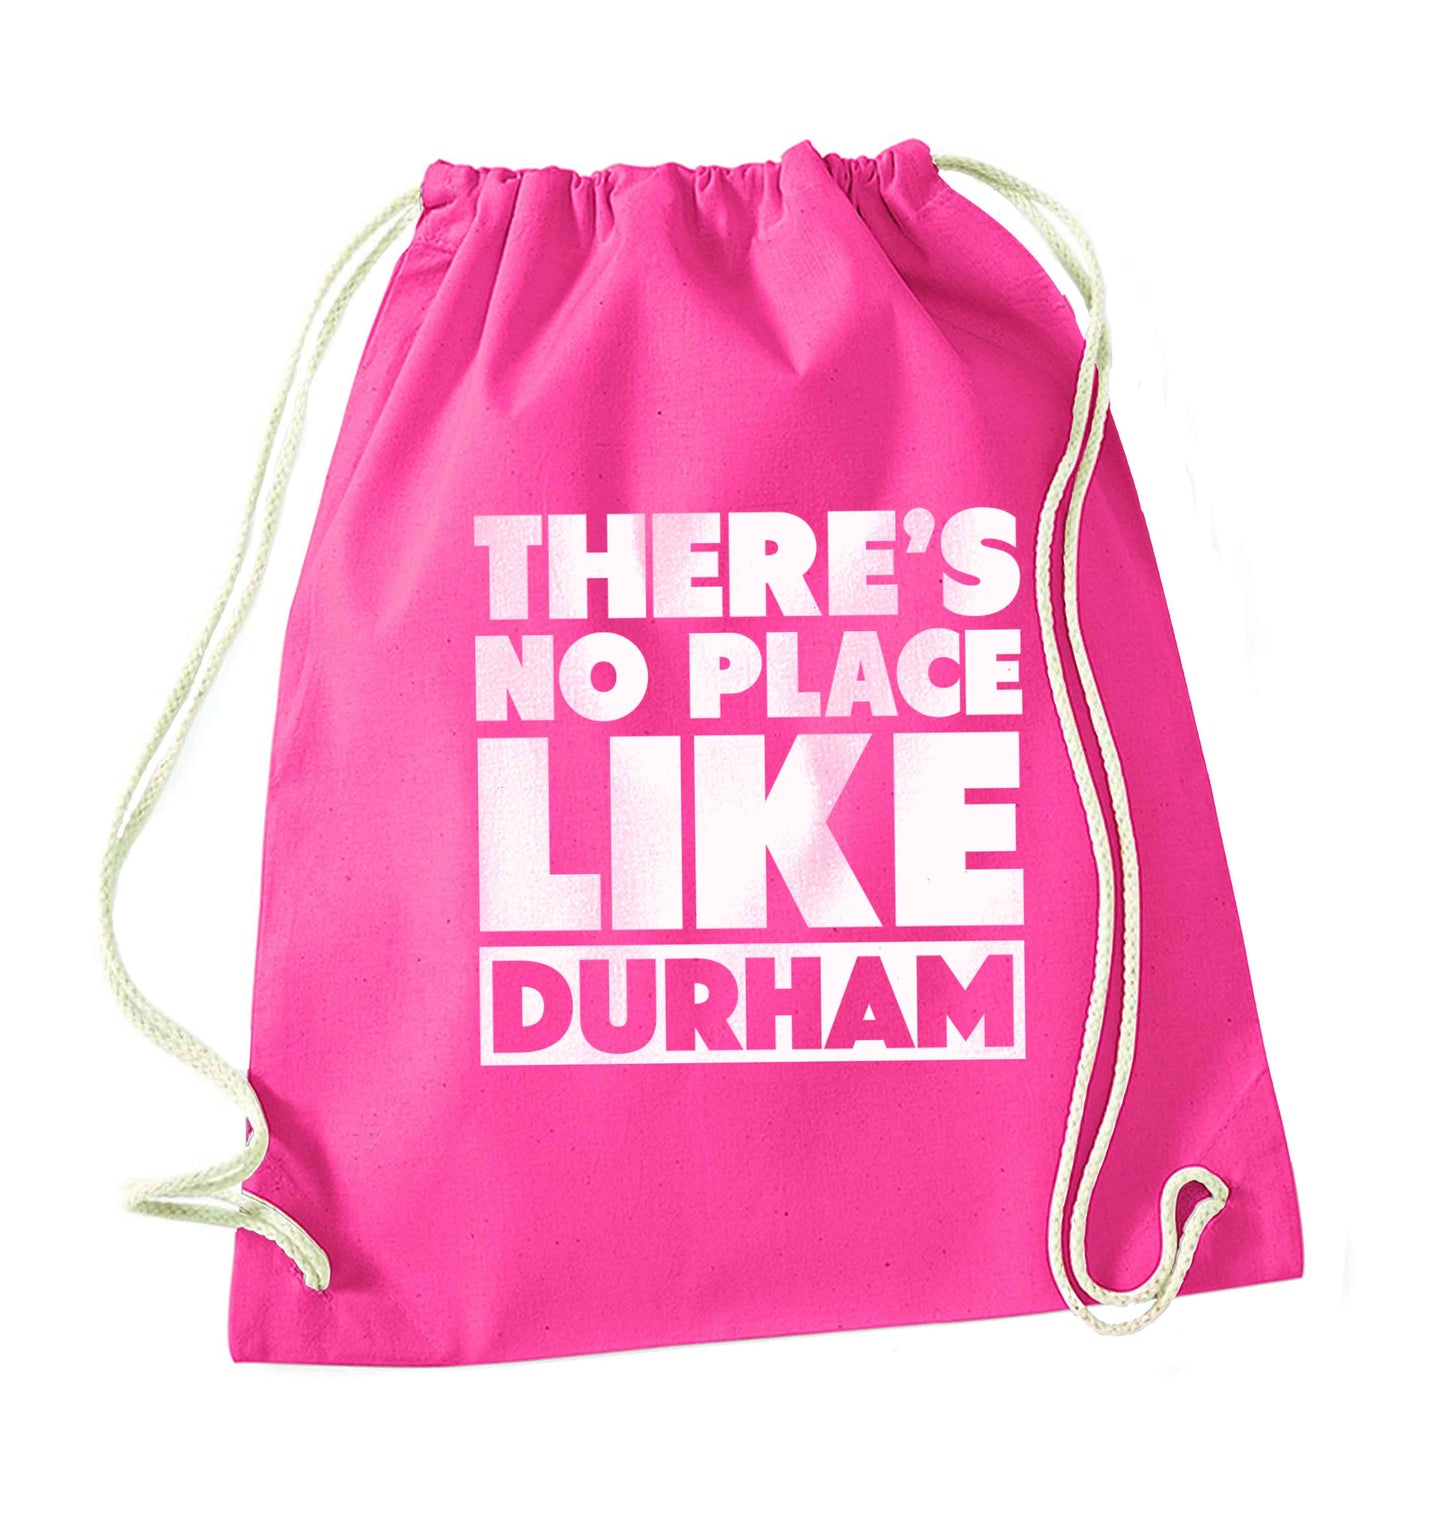 There's no place like Durham pink drawstring bag